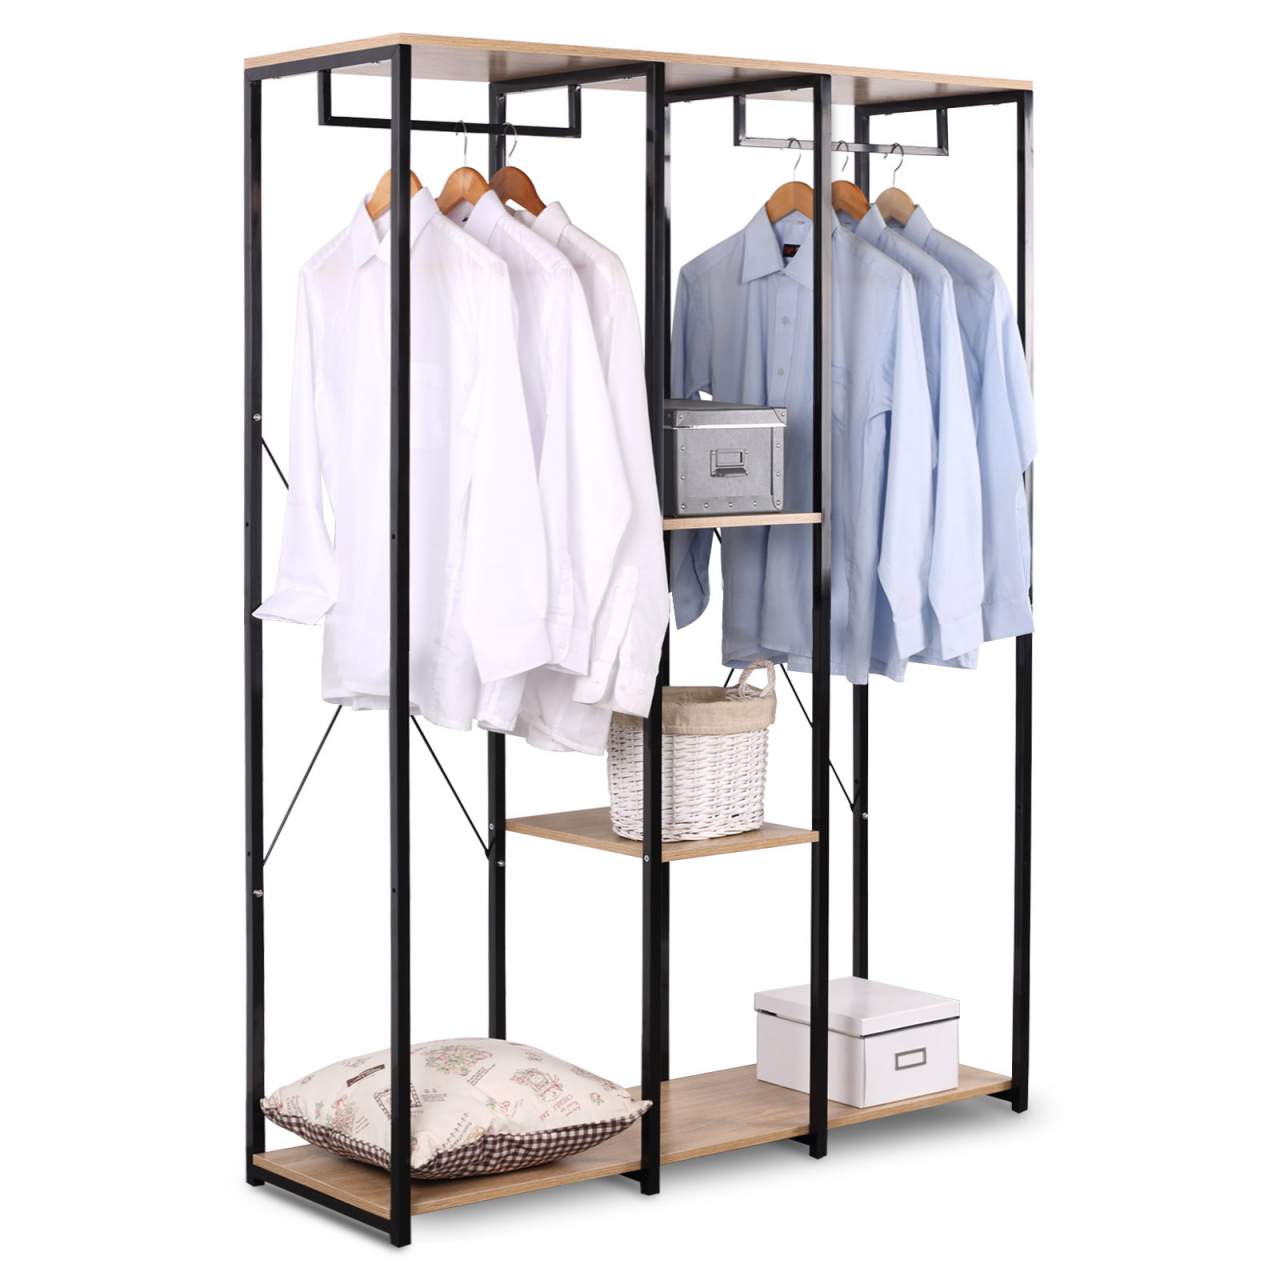 Clothing Rack Stand Large Clothes Rail Garment Hanging Display Stand Shoe Storage Shelves Heavy Duty Clothes Rail Rack 